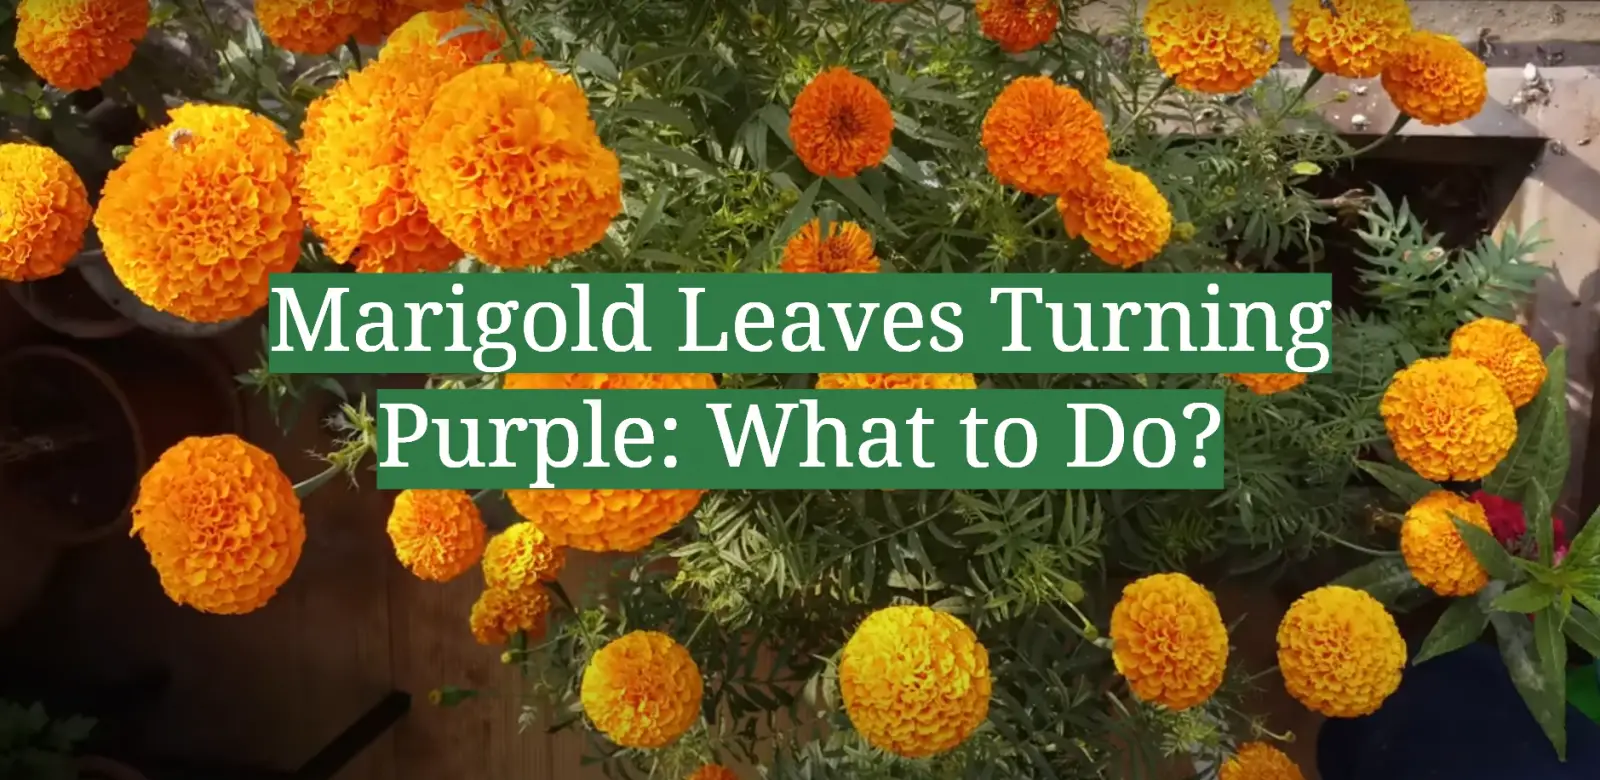 Marigold Leaves Turning Purple: What to Do?